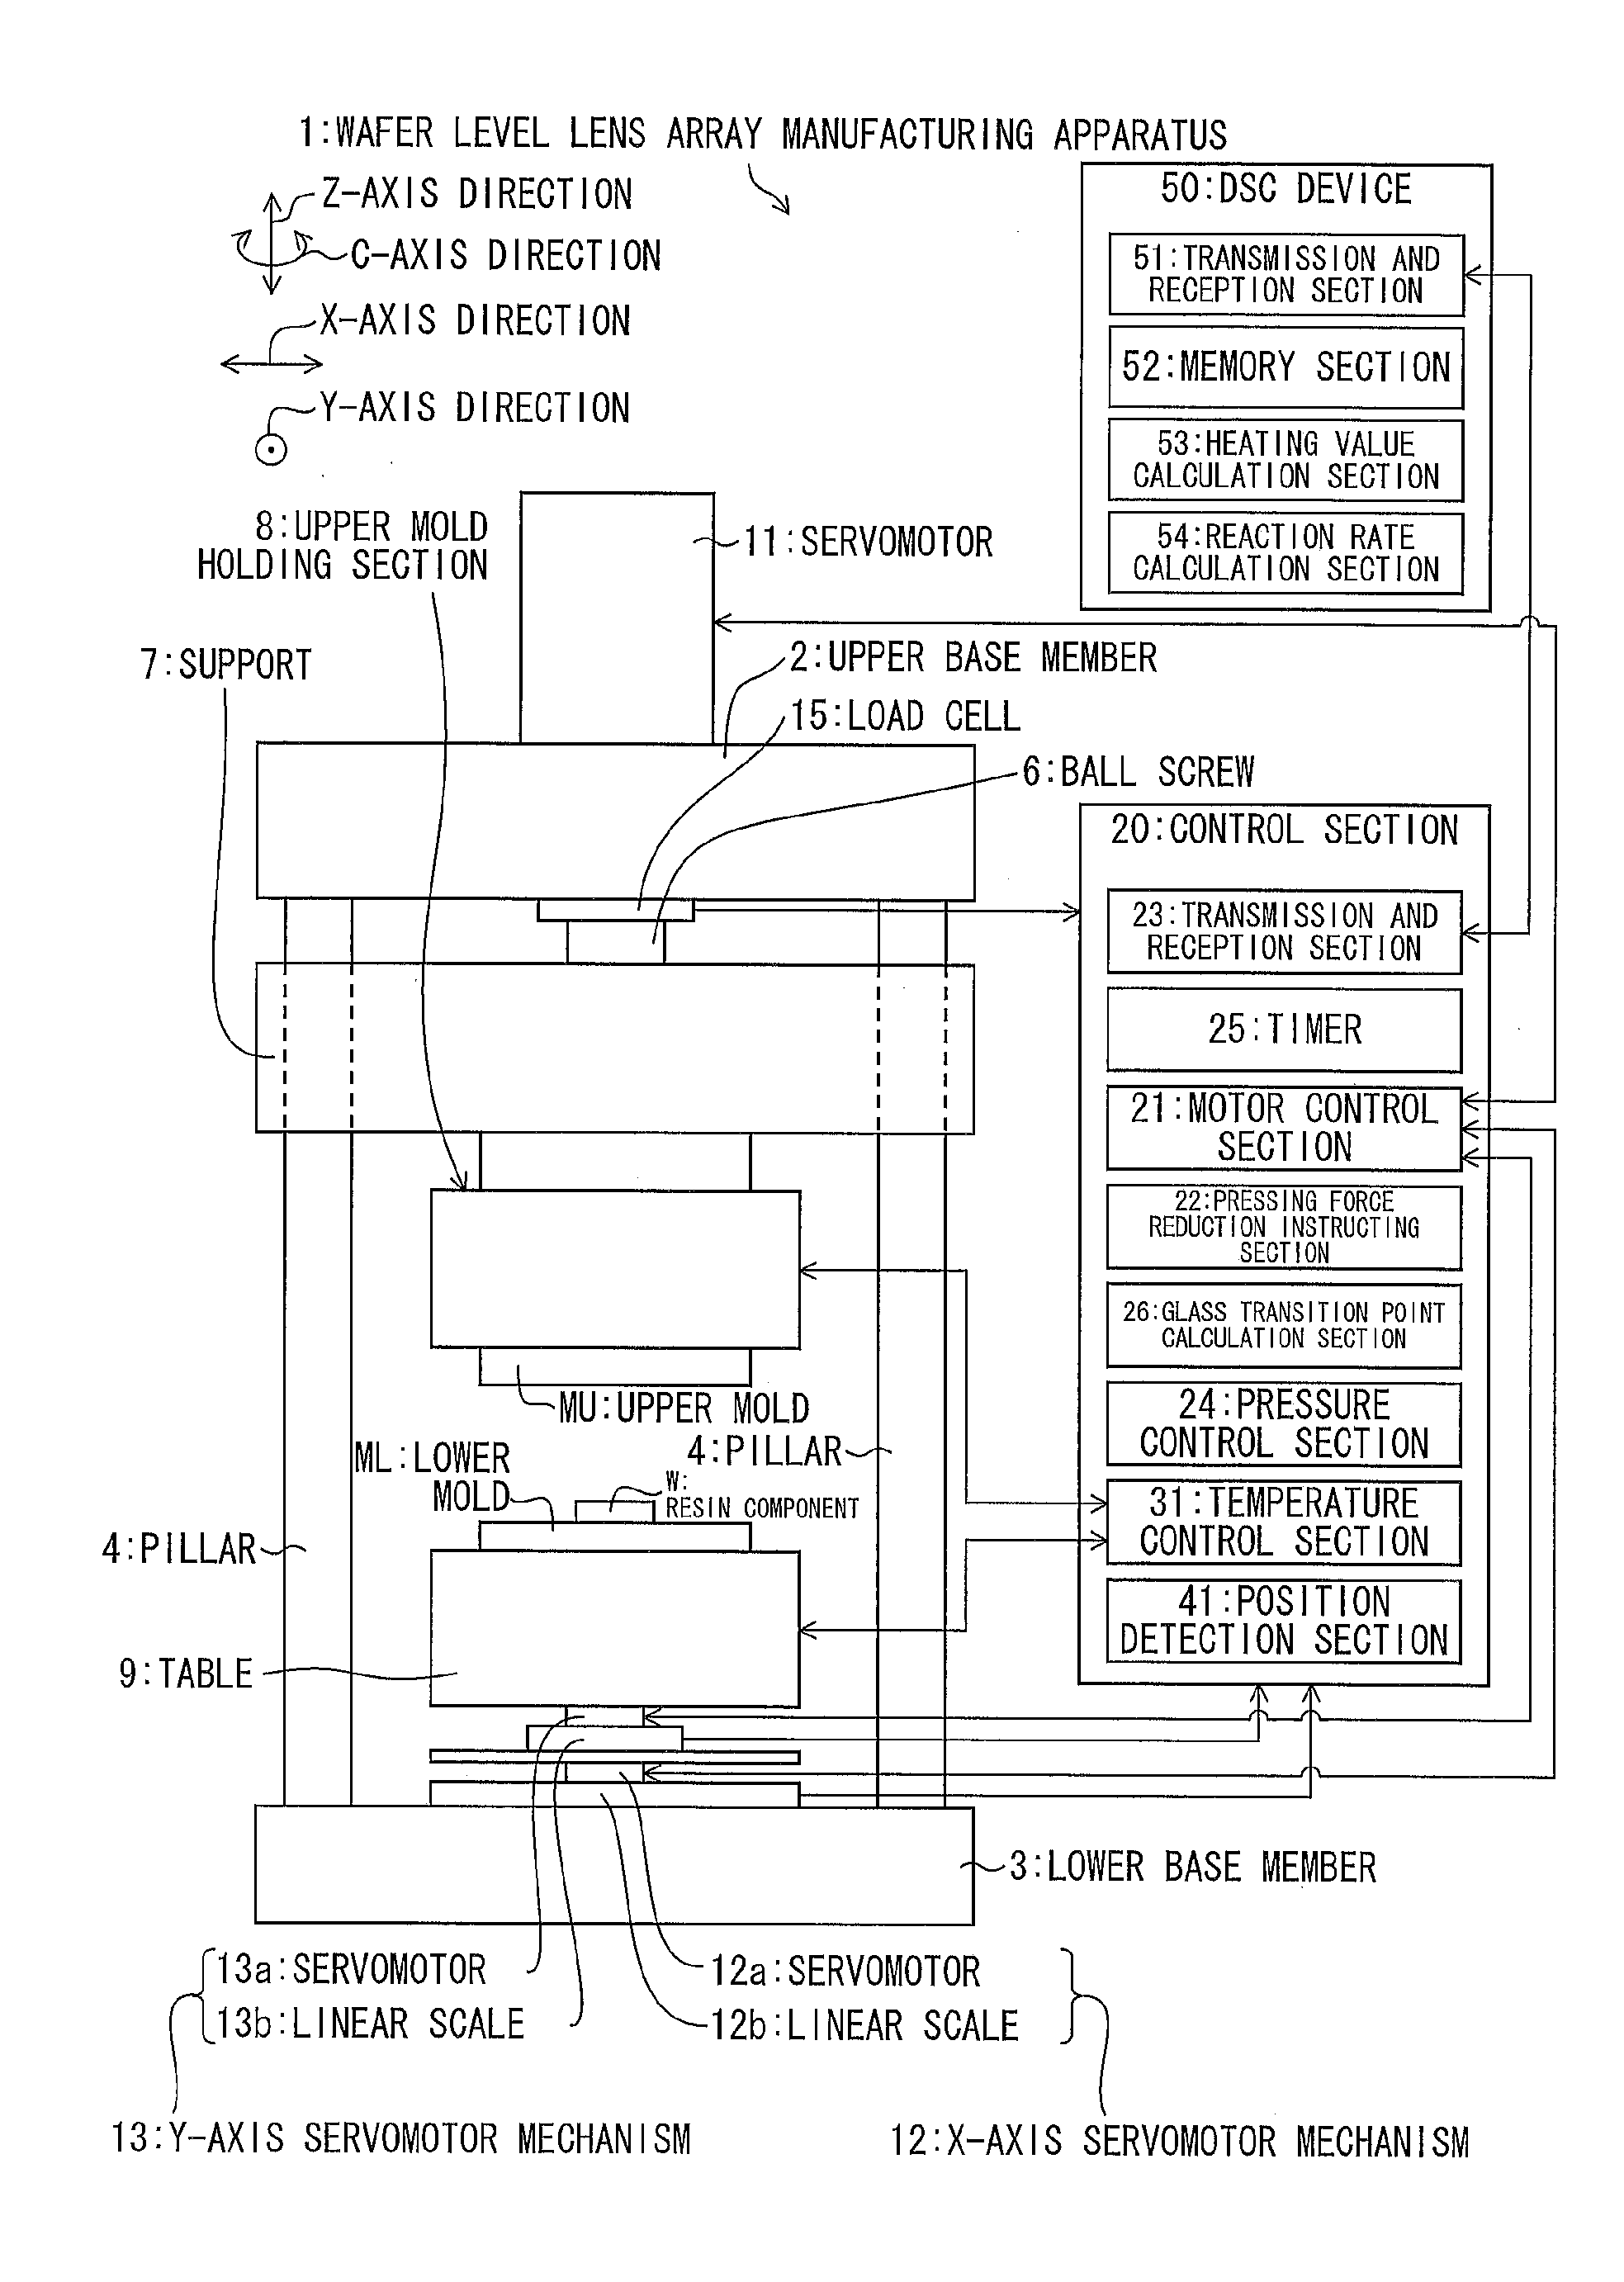 Molded product manufacturing apparatus, and molded product manufacturing method